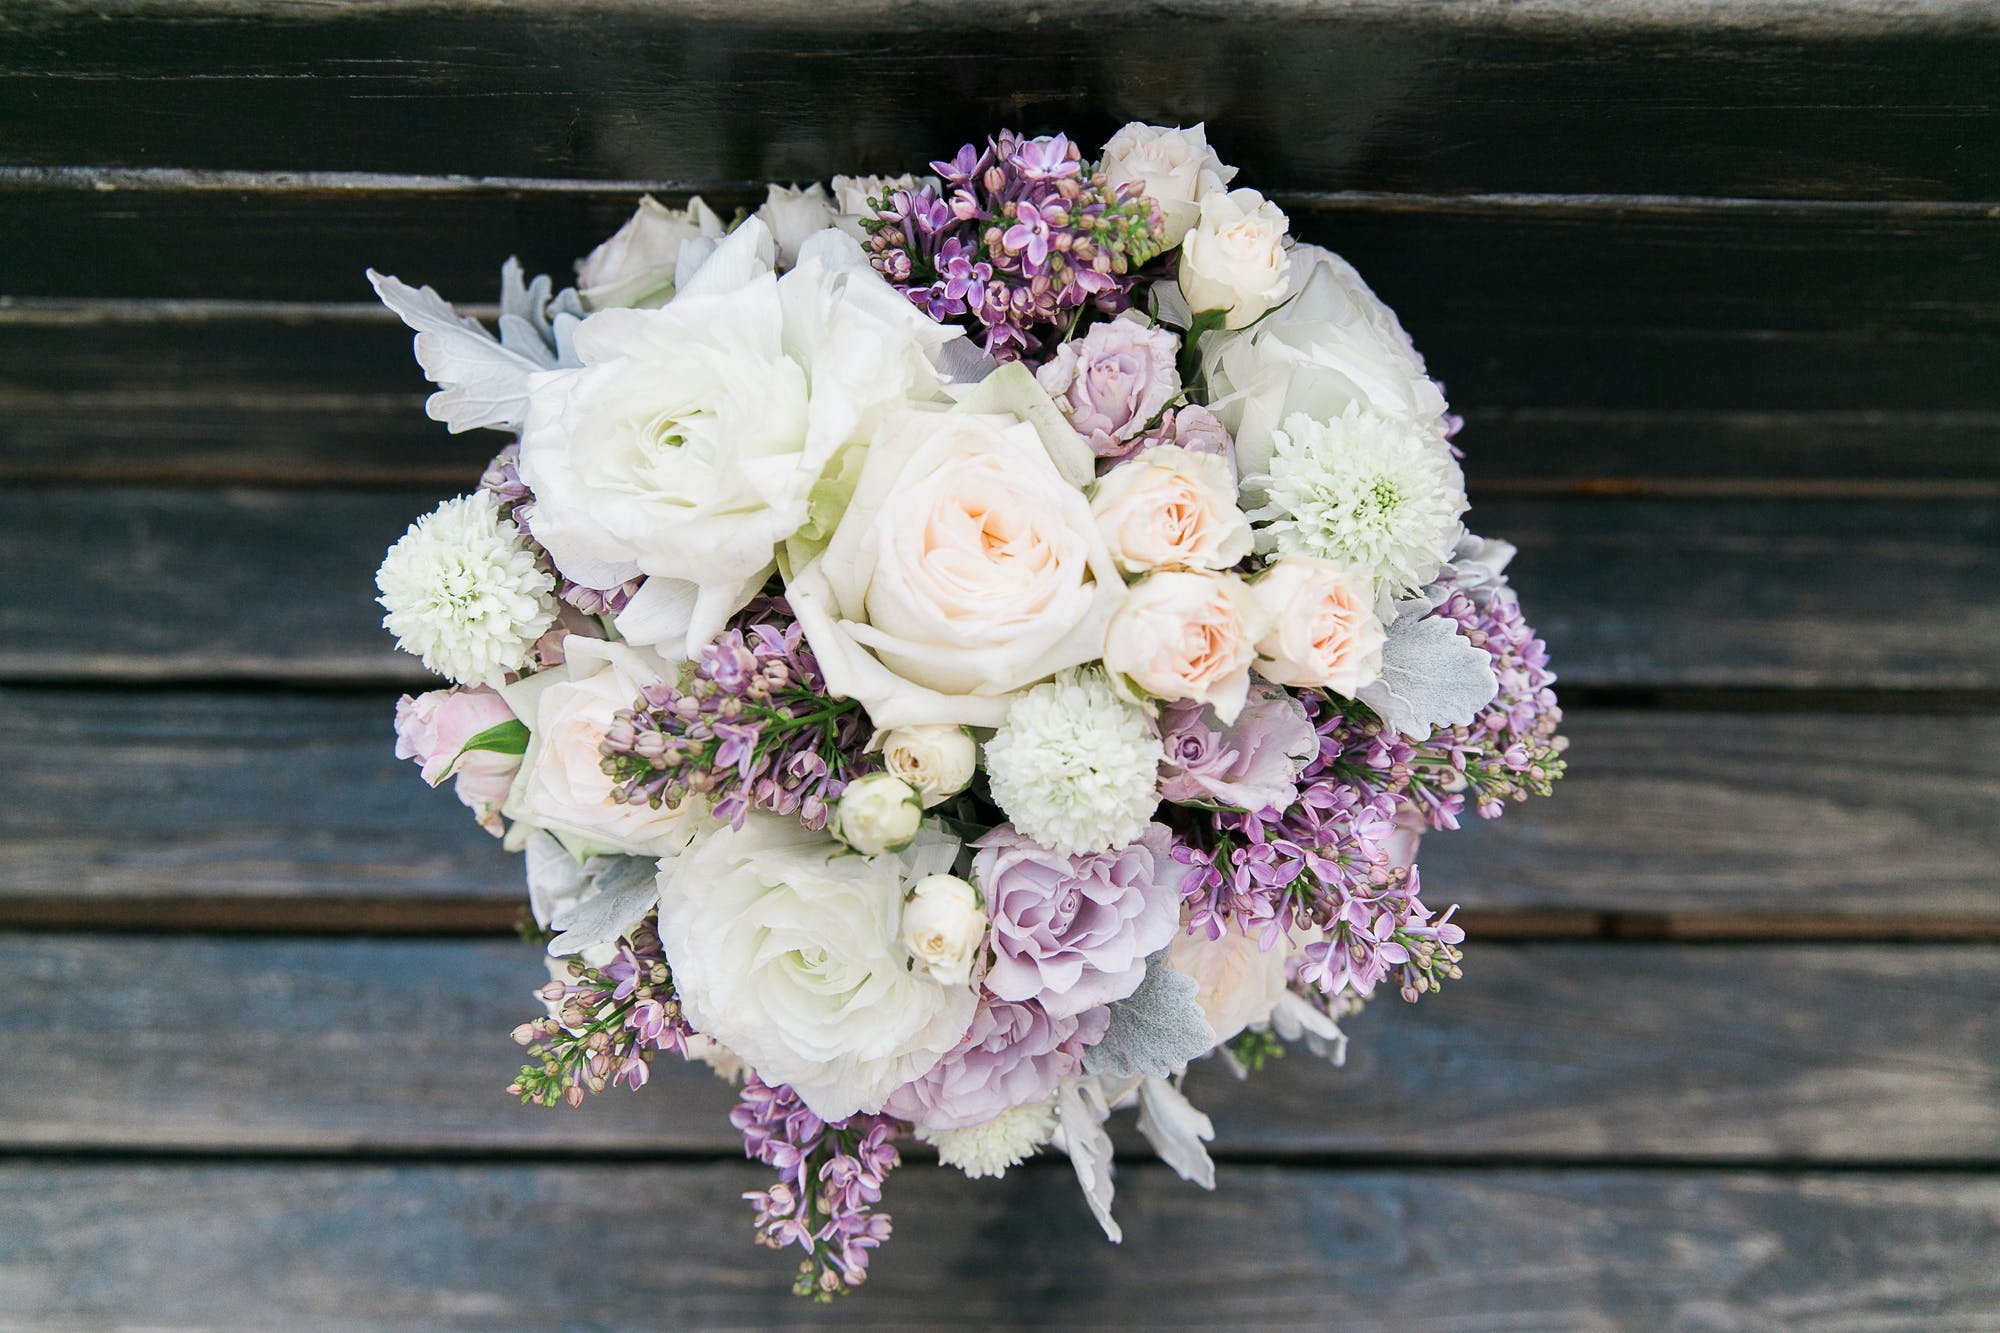 How Much Should a Bridal Bouquet Cost